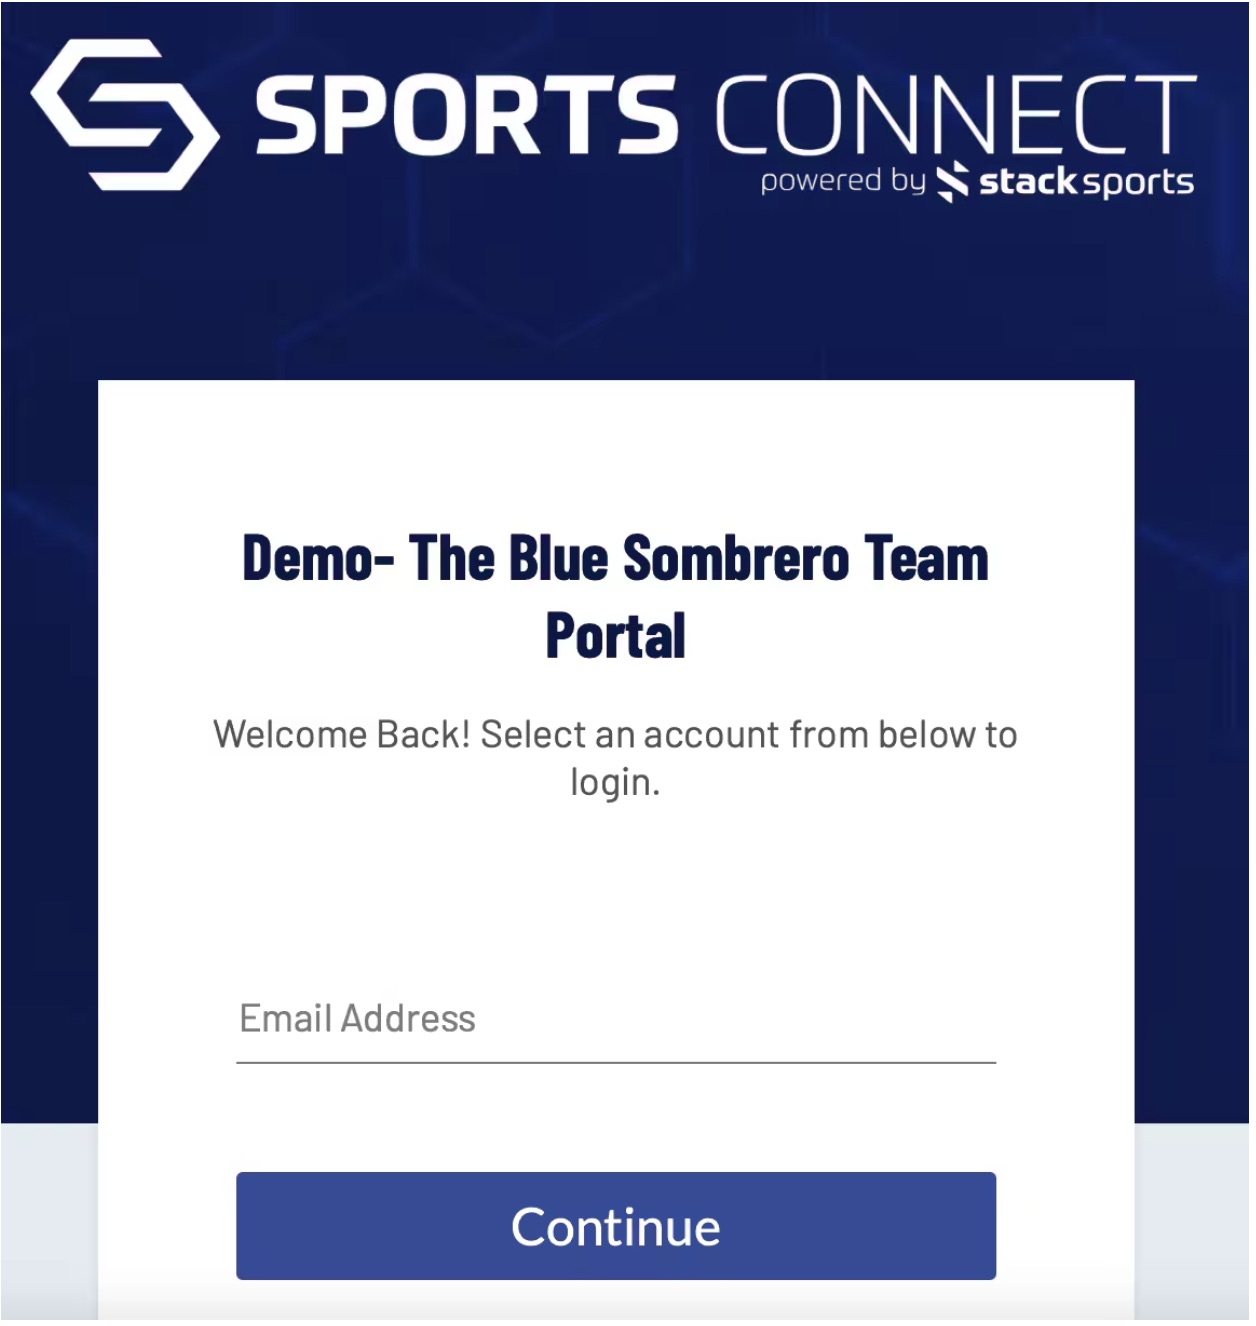 Sports Connect powered by stacksport screen shot